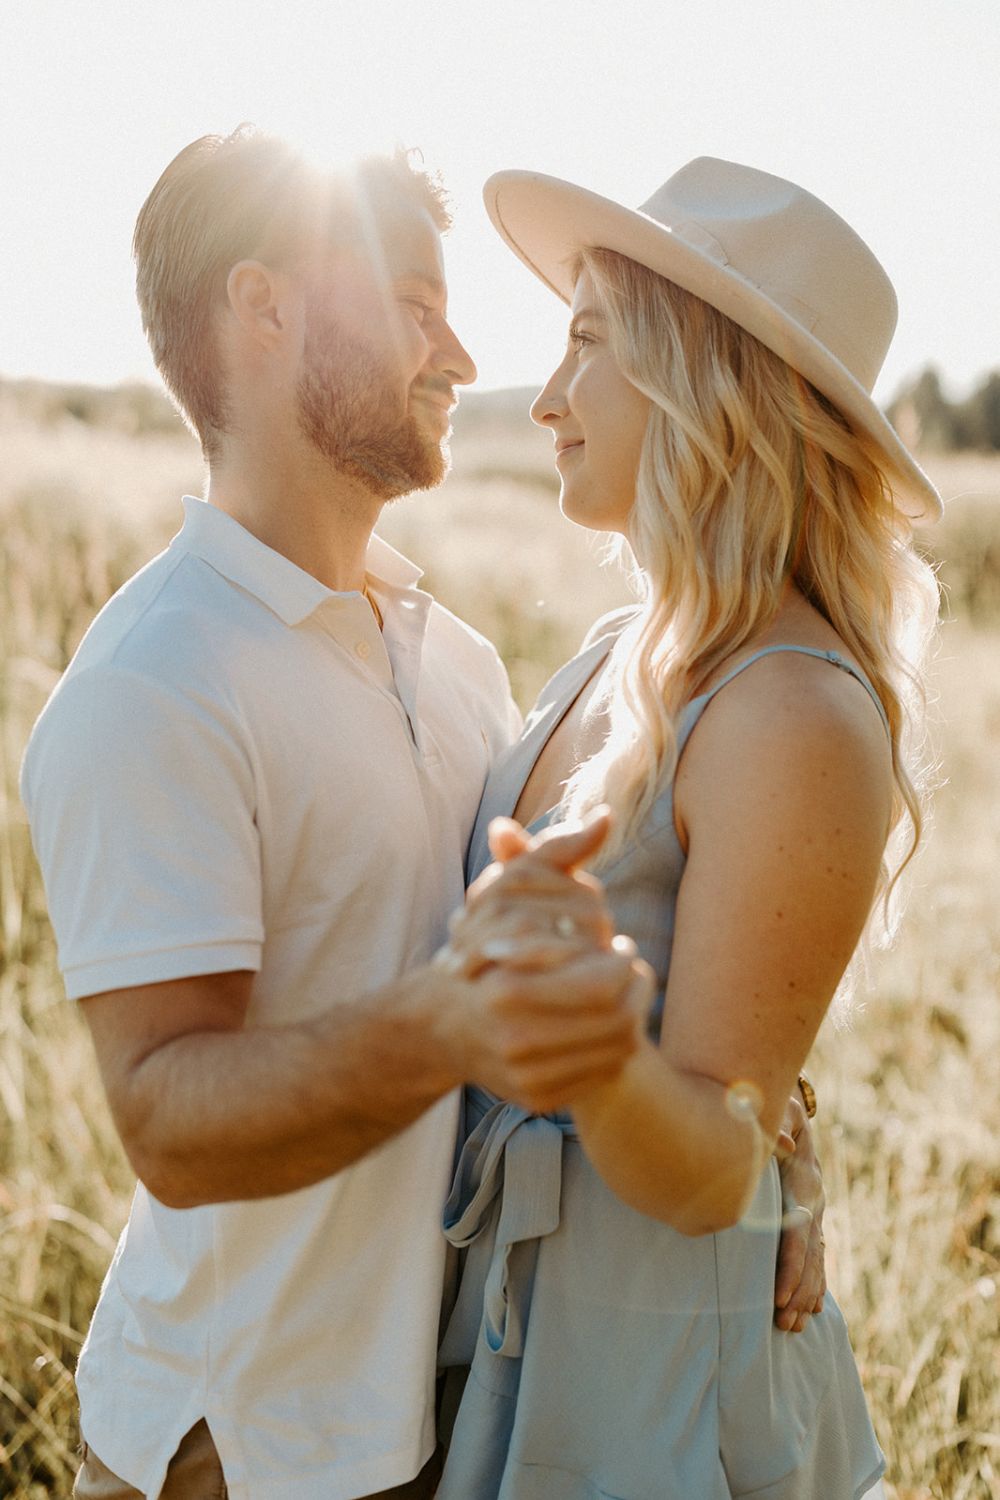 when to take engagement photos, best time to take engagement photos outside, where to take engagement photos near me